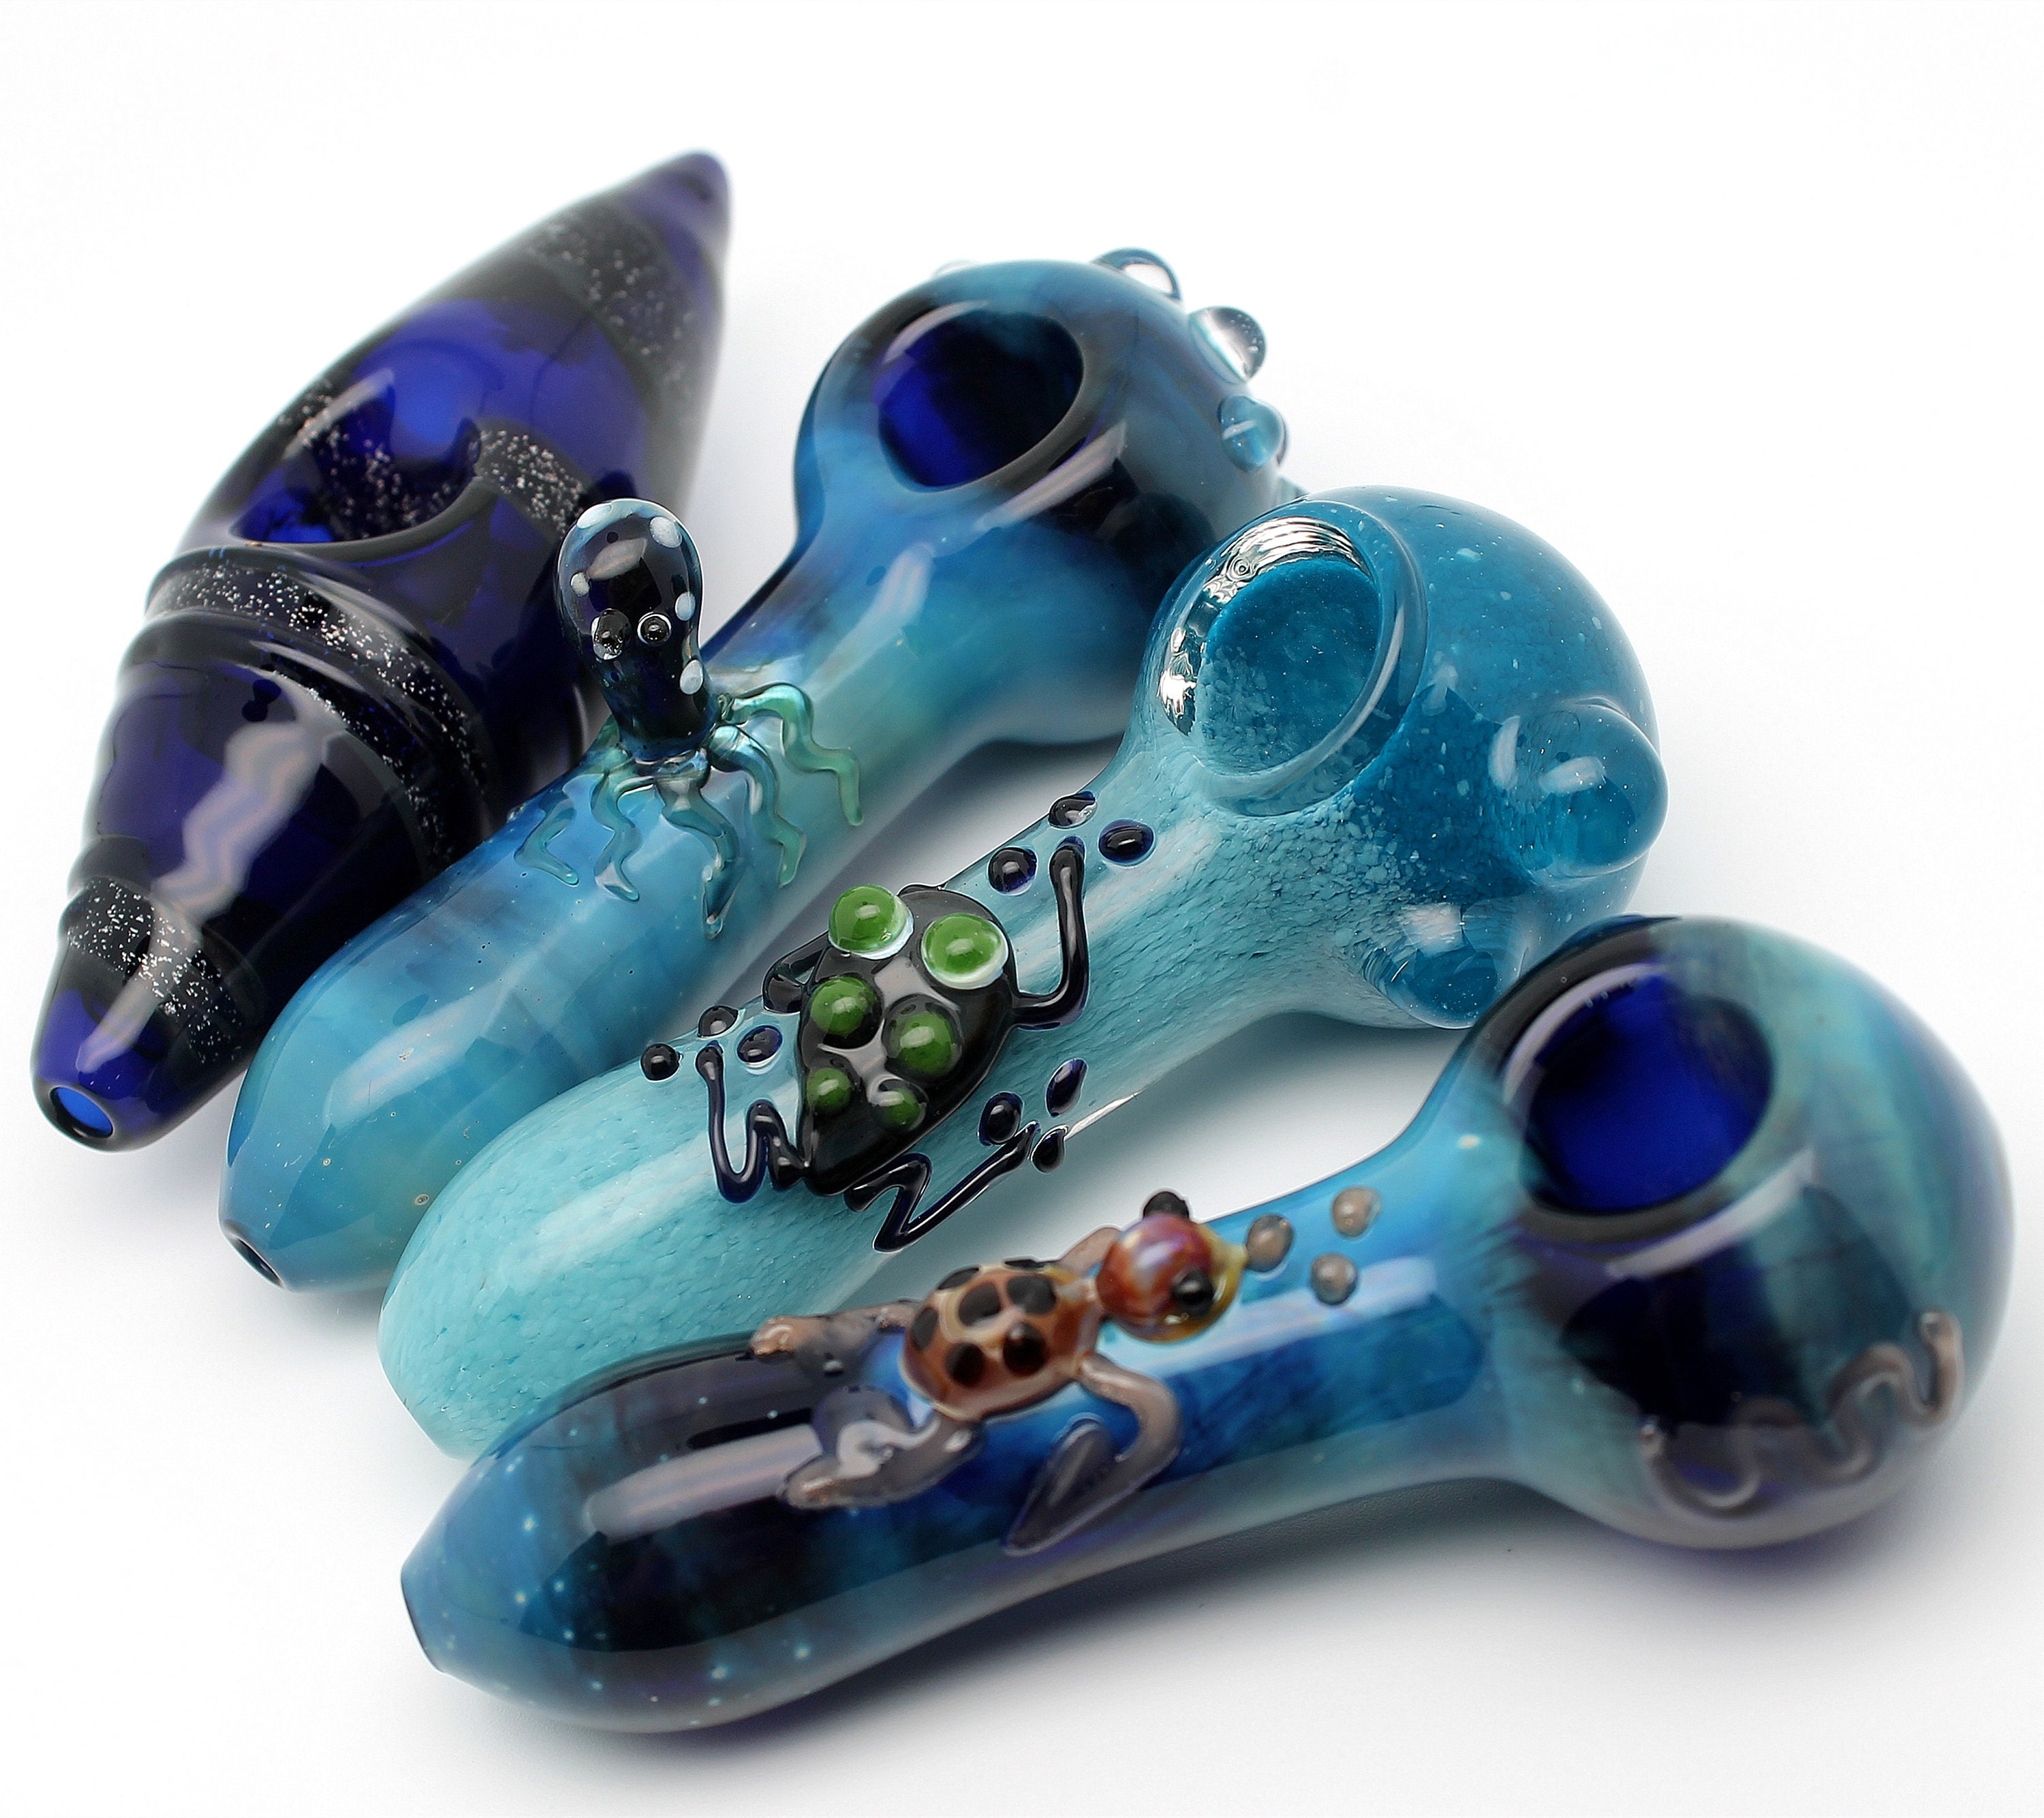 Swirled Fumed Turtle Glass Weed Pipe, Pipes For Sale